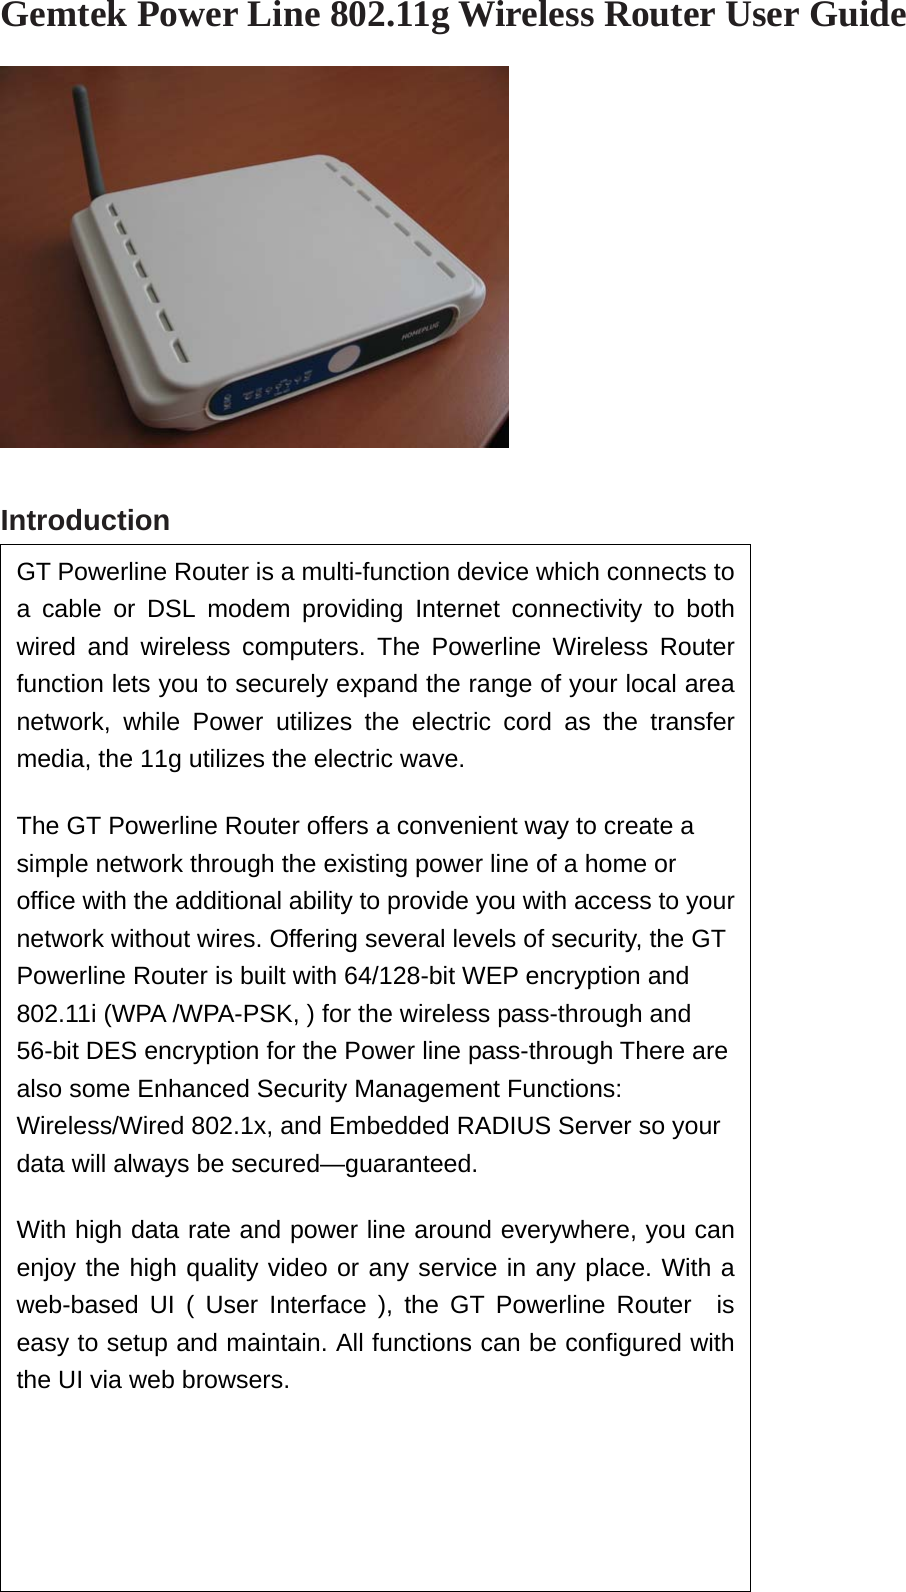  Gemtek Power Line 802.11g Wireless Router User Guide     Introduction                            GT Powerline Router is a multi-function device which connects toa cable or DSL modem providing Internet connectivity to bothwired and wireless computers. The Powerline Wireless Routerfunction lets you to securely expand the range of your local areanetwork, while Power utilizes the electric cord as the transfermedia, the 11g utilizes the electric wave. The GT Powerline Router offers a convenient way to create a simple network through the existing power line of a home or office with the additional ability to provide you with access to yournetwork without wires. Offering several levels of security, the GT Powerline Router is built with 64/128-bit WEP encryption and 802.11i (WPA /WPA-PSK, ) for the wireless pass-through and 56-bit DES encryption for the Power line pass-through There are also some Enhanced Security Management Functions: Wireless/Wired 802.1x, and Embedded RADIUS Server so your data will always be secured—guaranteed.   With high data rate and power line around everywhere, you canenjoy the high quality video or any service in any place. With aweb-based UI ( User Interface ), the GT Powerline Router  iseasy to setup and maintain. All functions can be configured withthe UI via web browsers.    